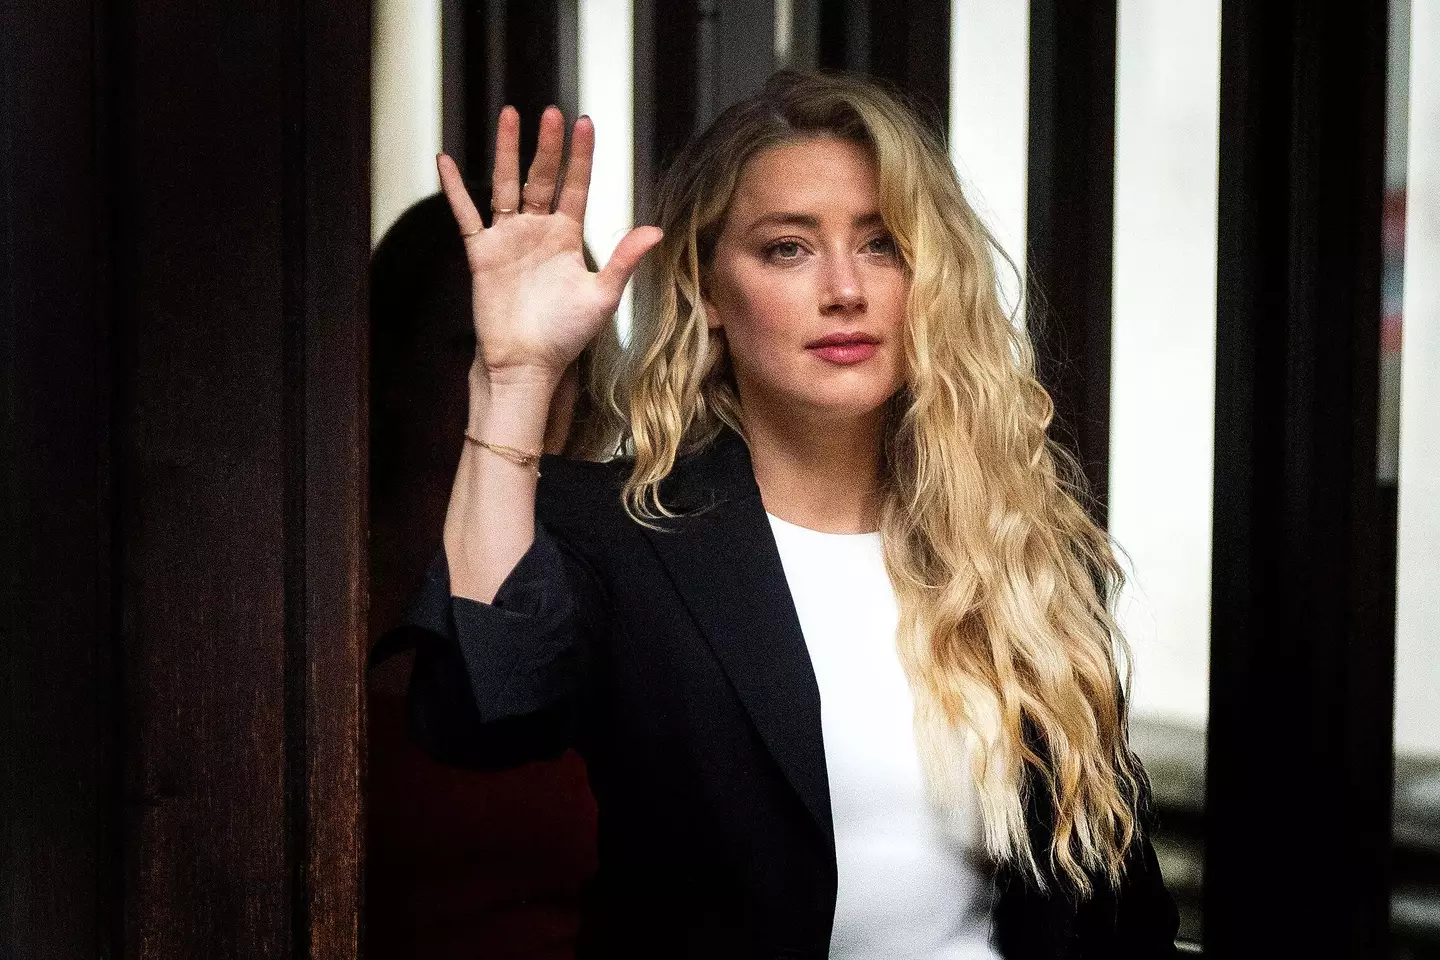 Amber Heard has paid Johnny Depp a $1 million settlement for their defamation trial.